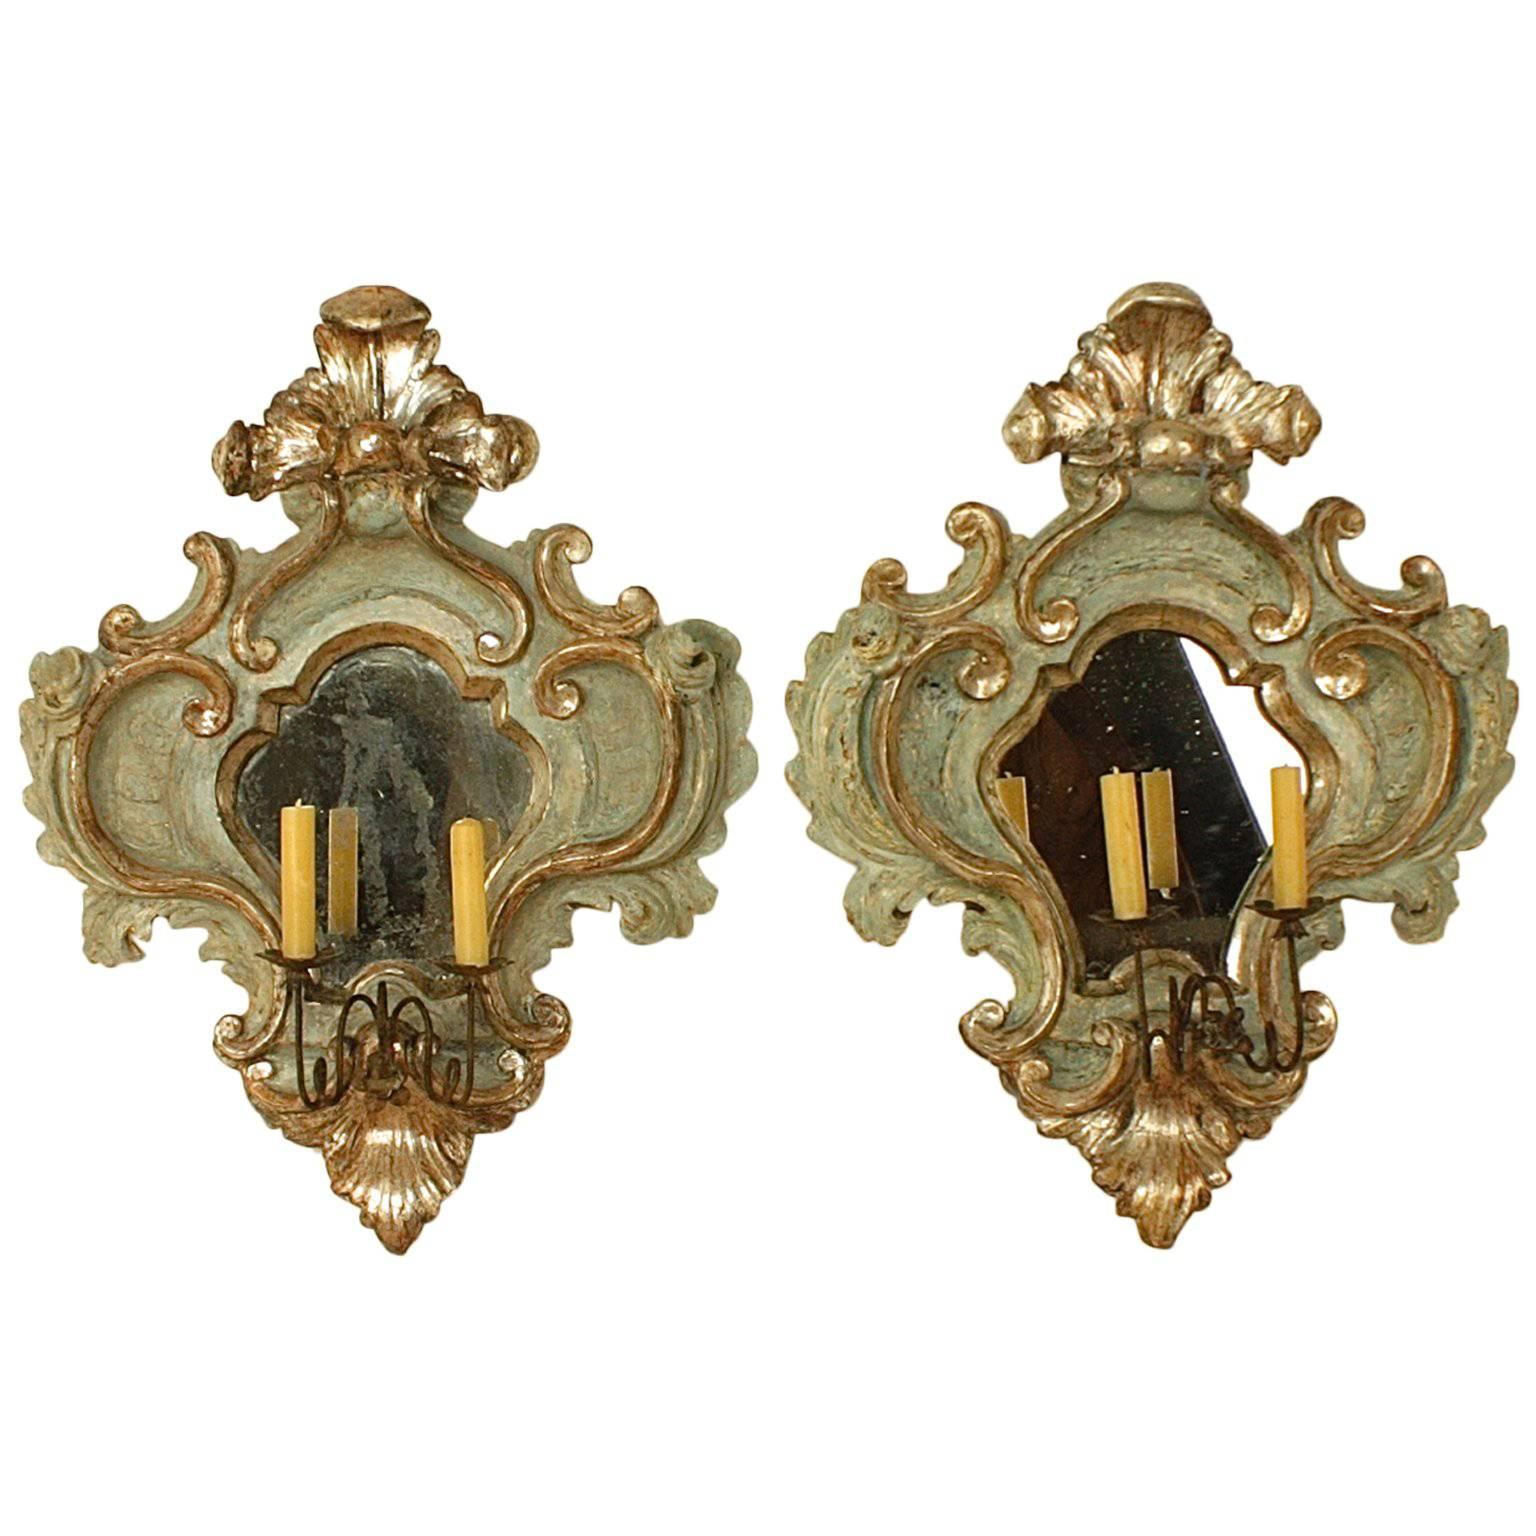 Pair of 18th Century Italian Baroque Painted and Silvered Sconces or Wall Lights